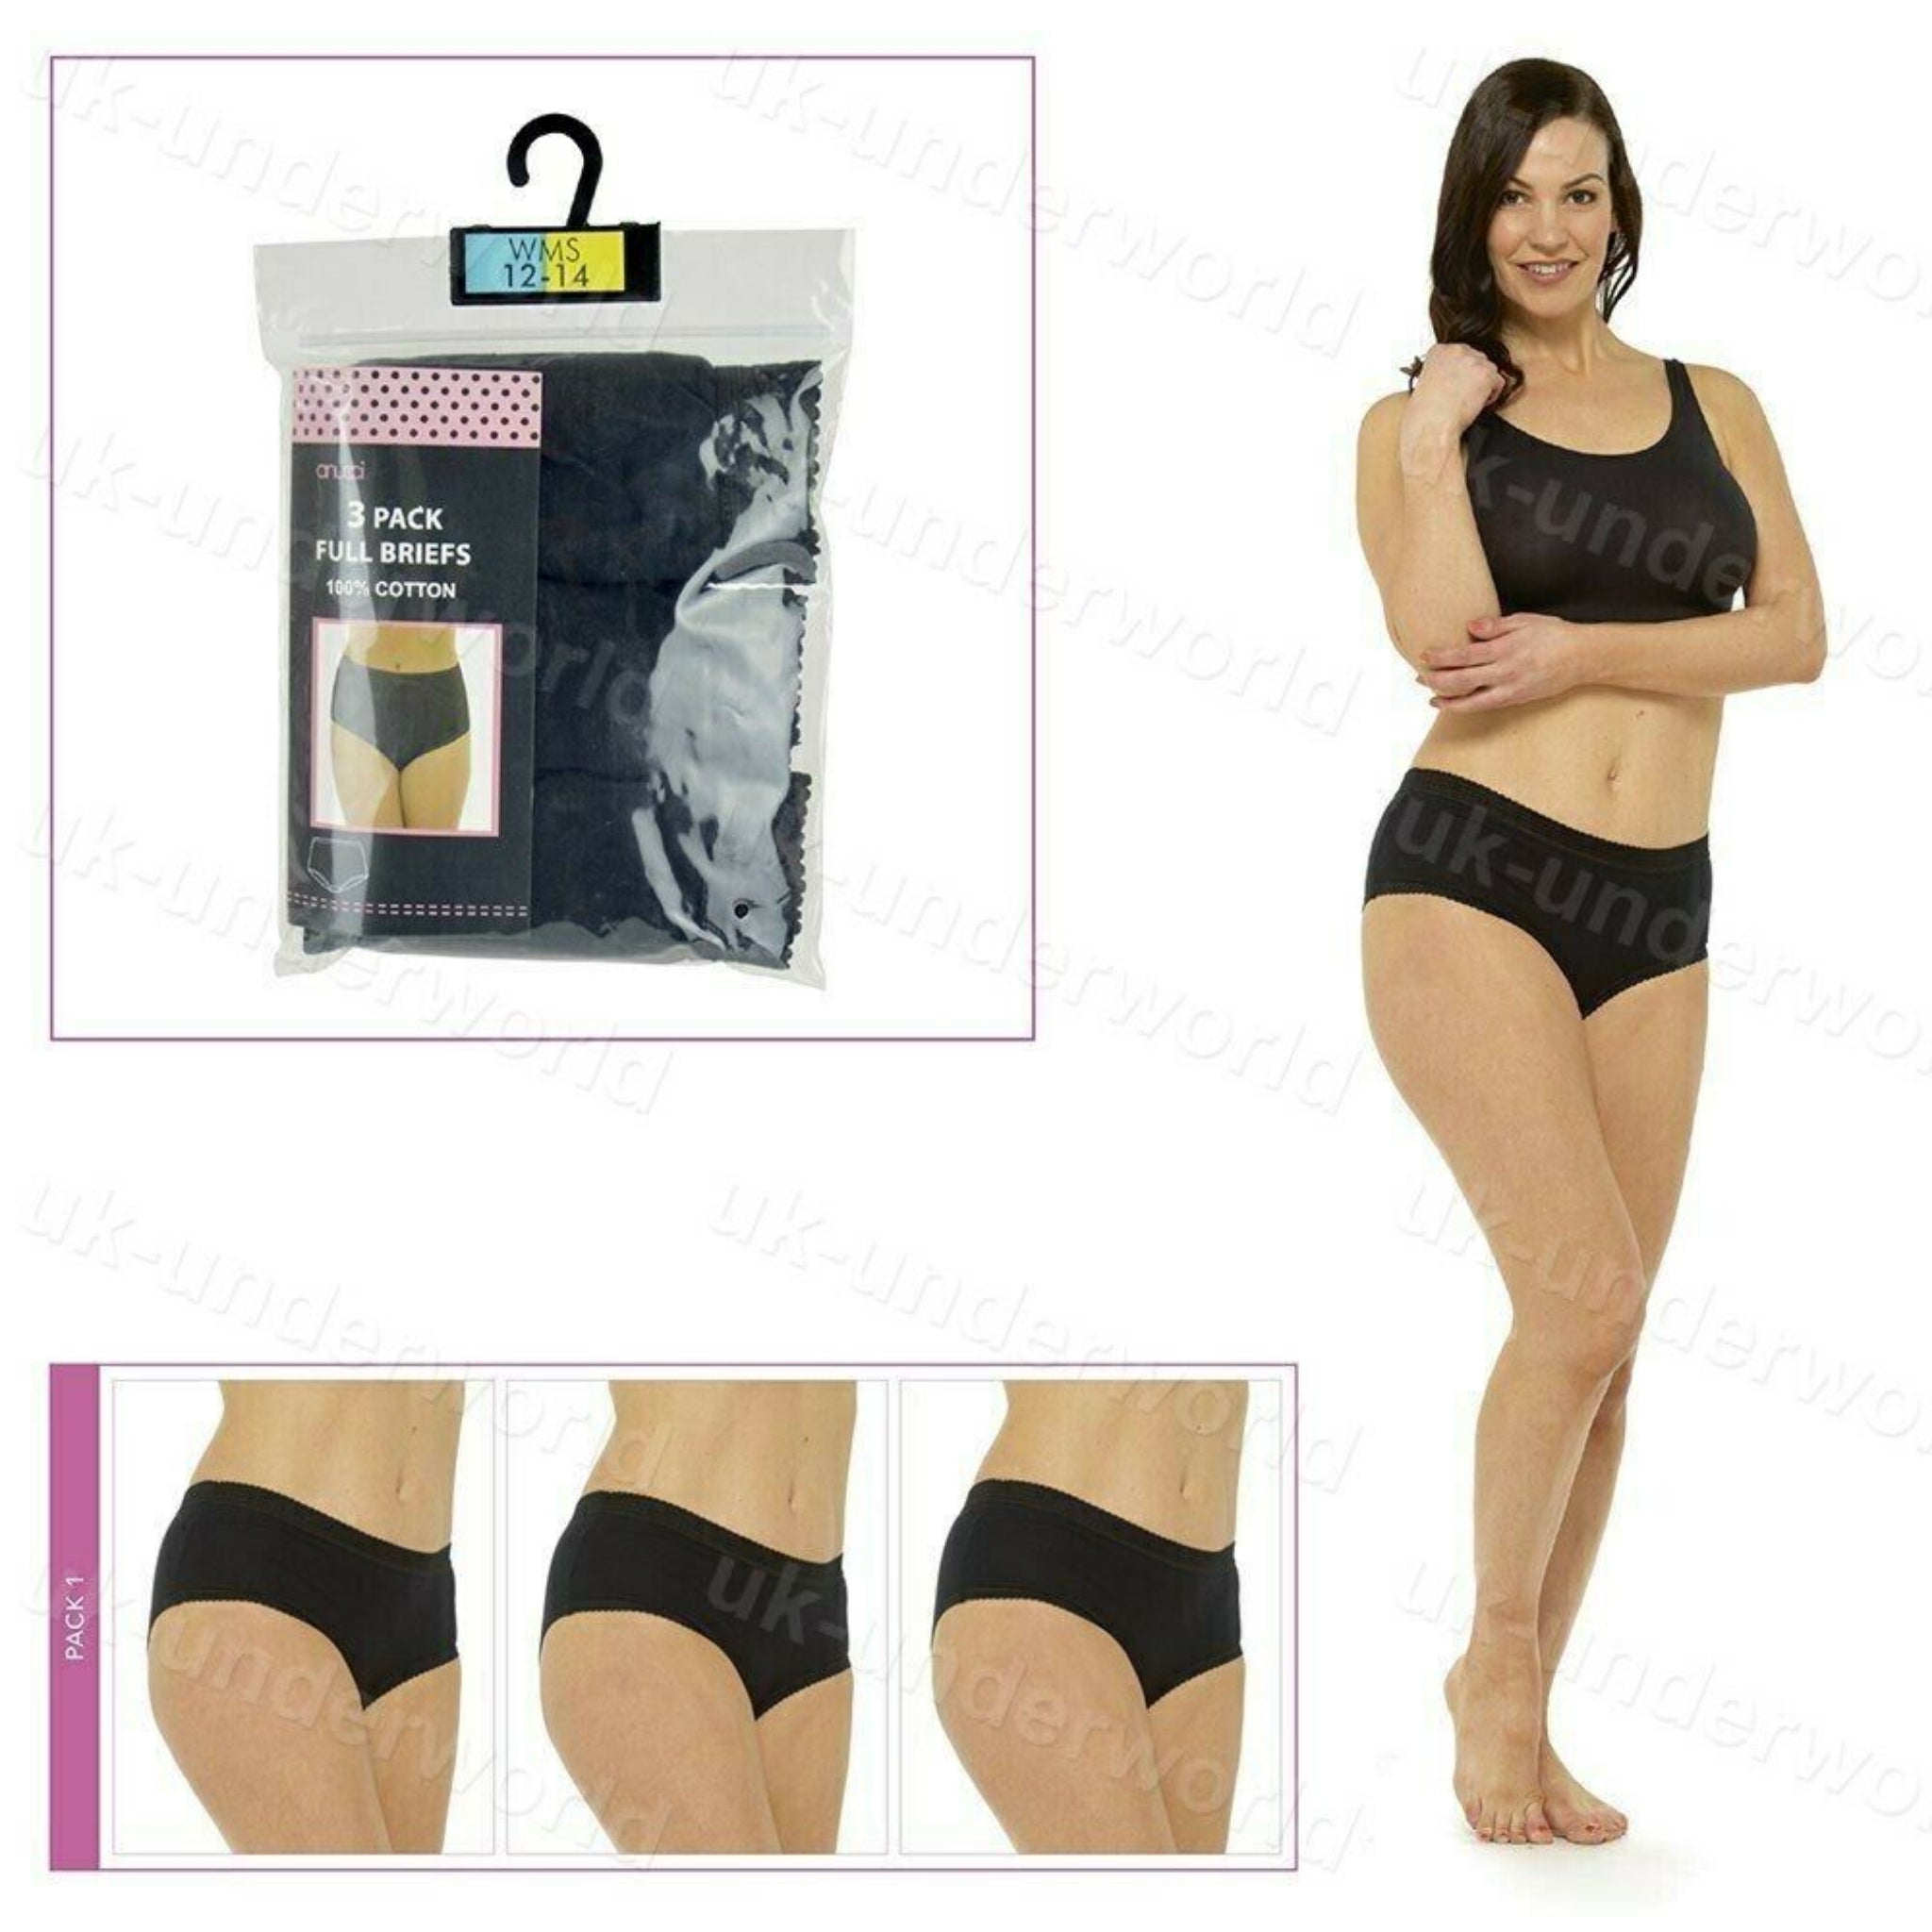 Beclen Harp 3 Pair Women/Ladies Cotton Full Briefs Pants Knickers Underwears For Adults Size 12-26-Perfect Christmas/Xmas Gift